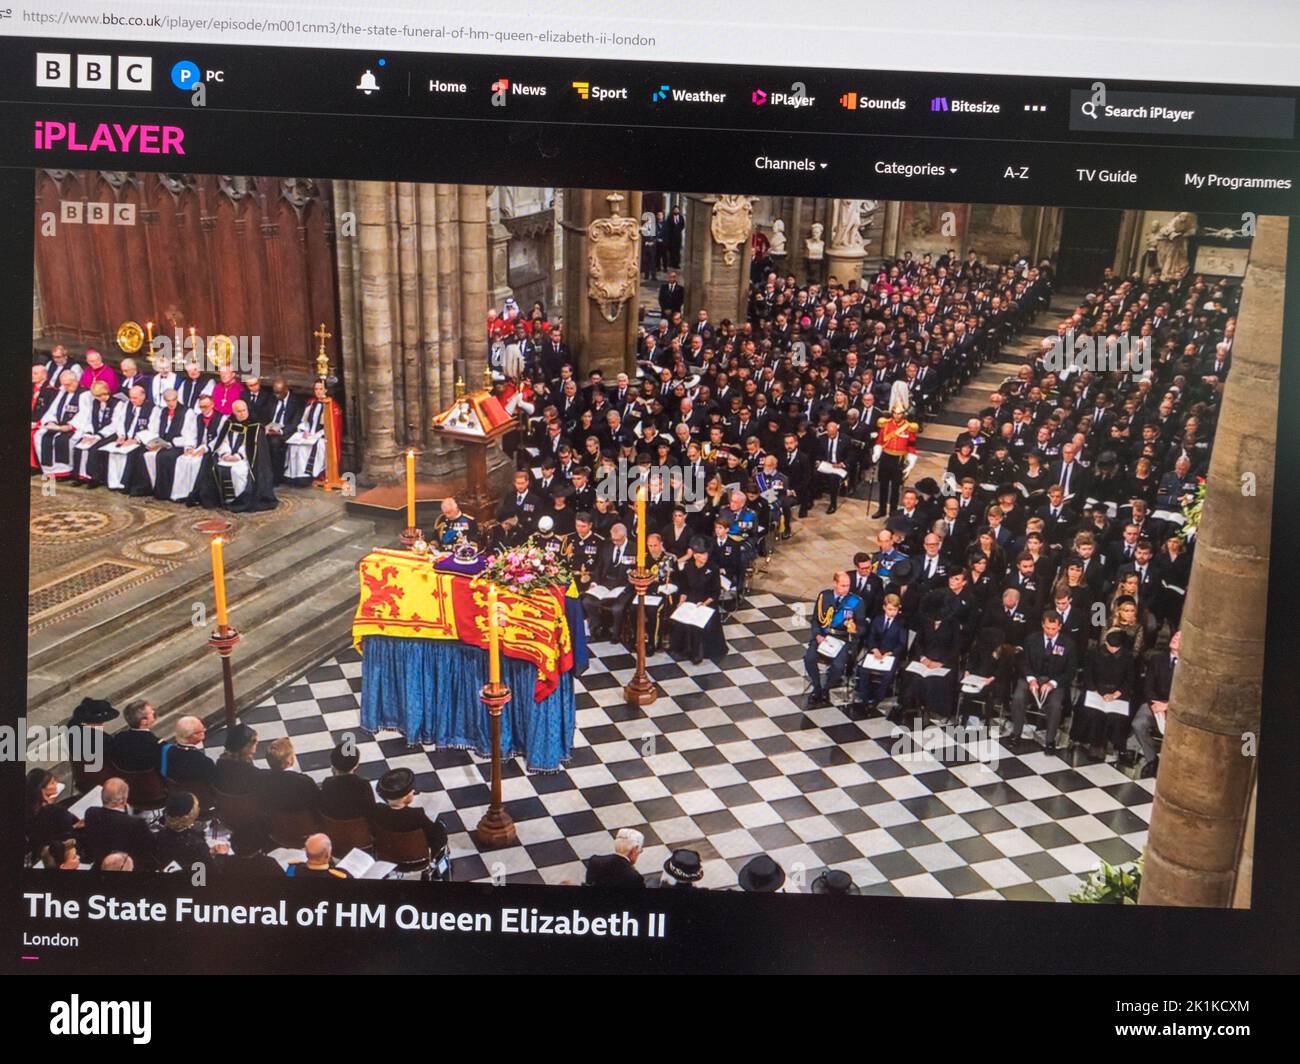 The BBC News website (iPLAYER) during the funeral of Queen Elizabeth II in London on 19th September 2022. Stock Photo